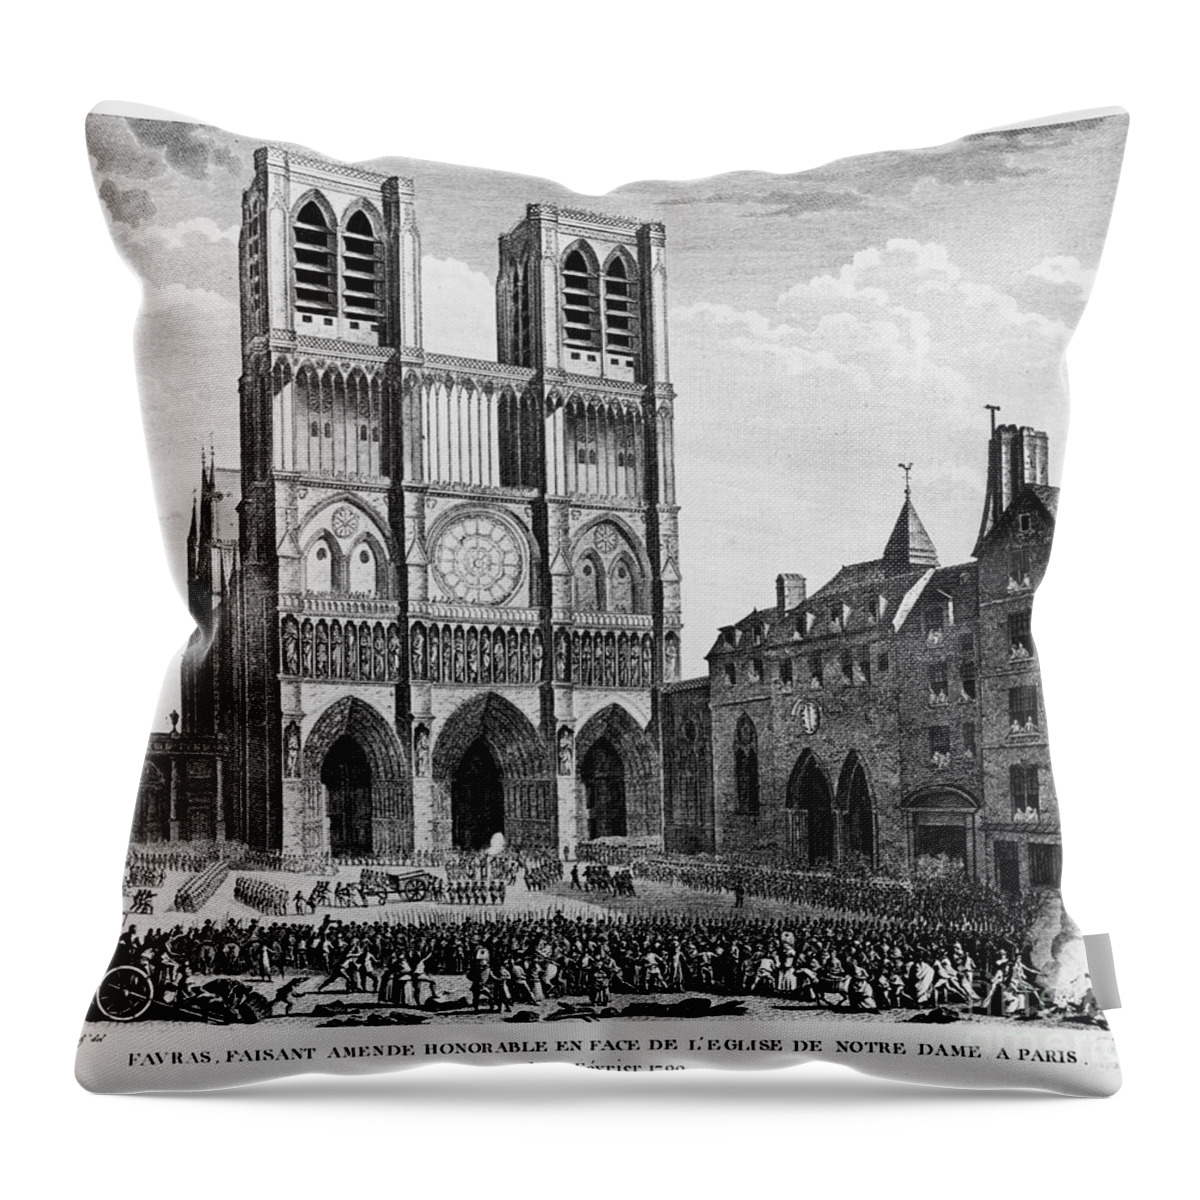 1790 Throw Pillow featuring the photograph Paris: Notre Dame, 1790 by Granger